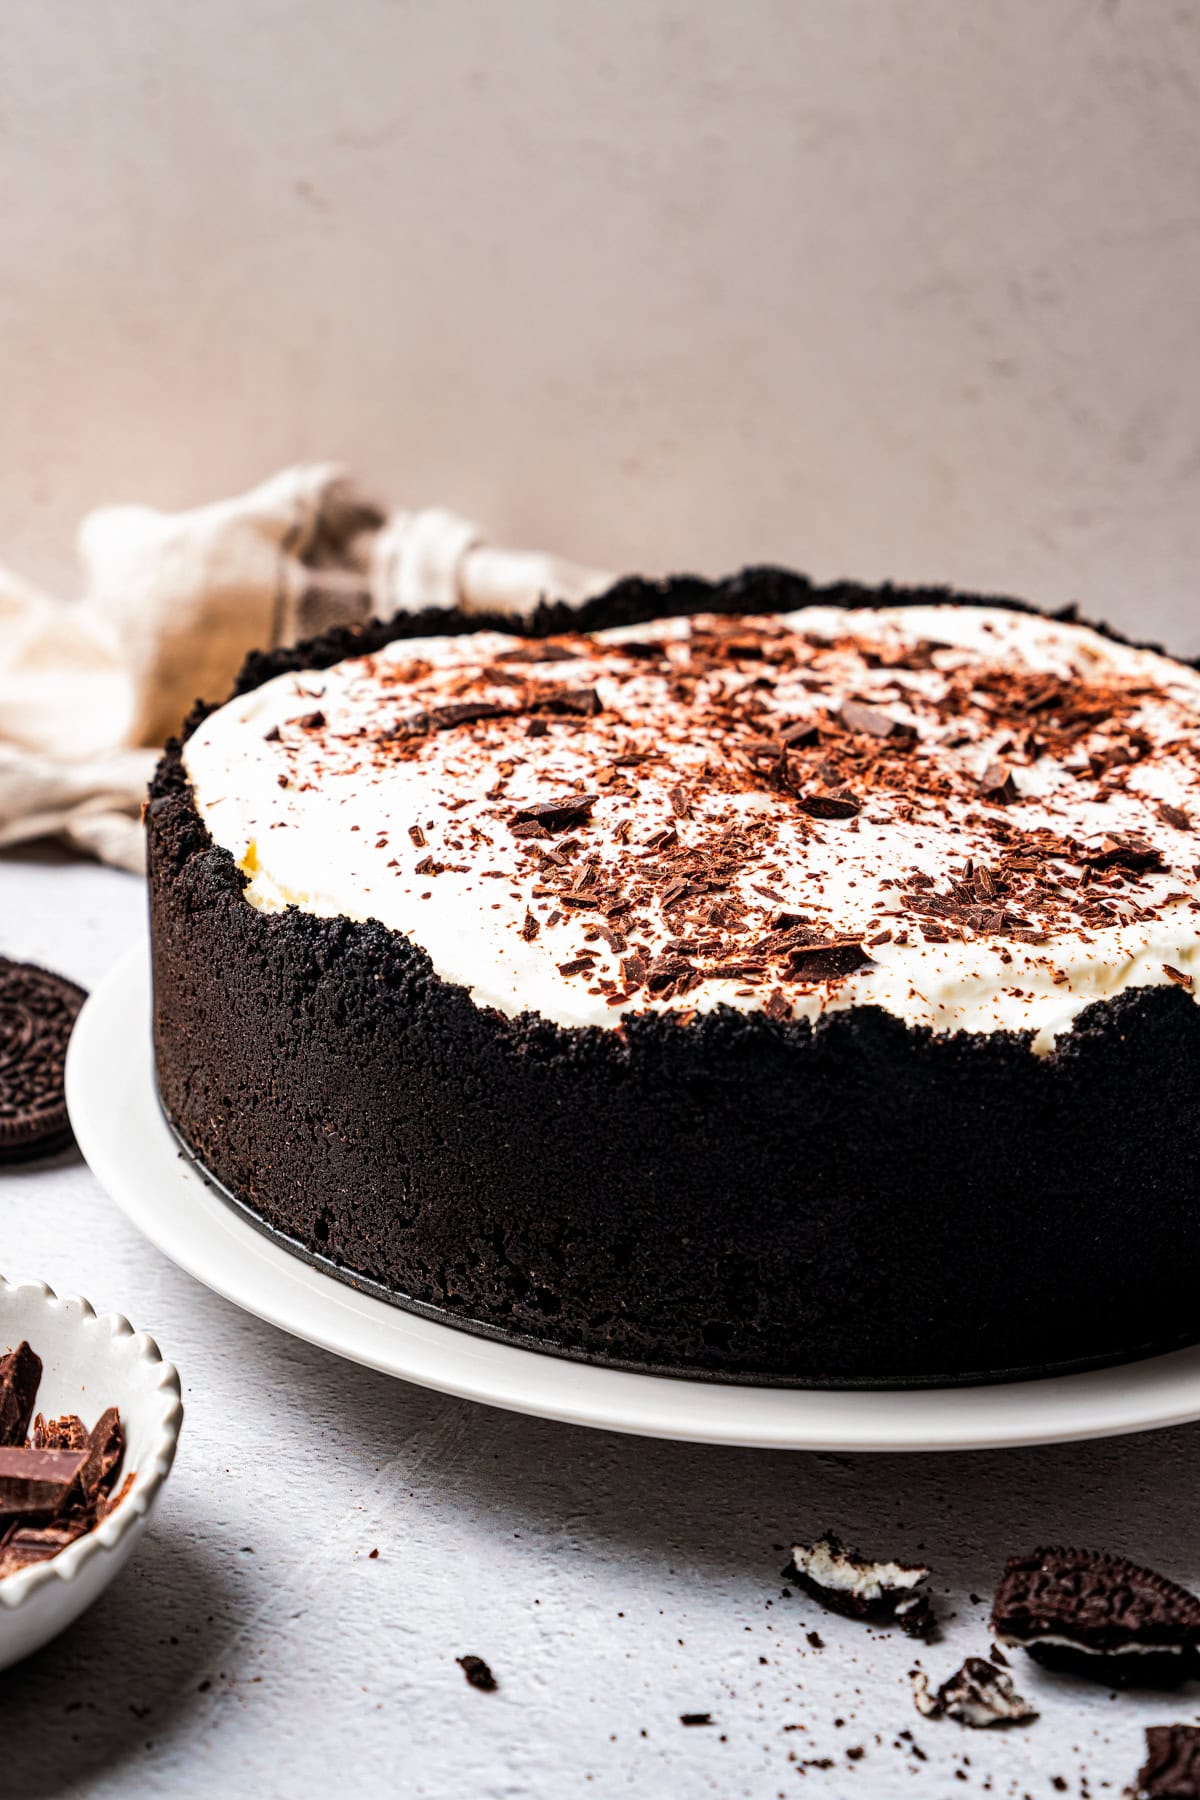 A whole Mississippi mud pie garnished with chocolate shavings inside an Oreo crust on a white plate.